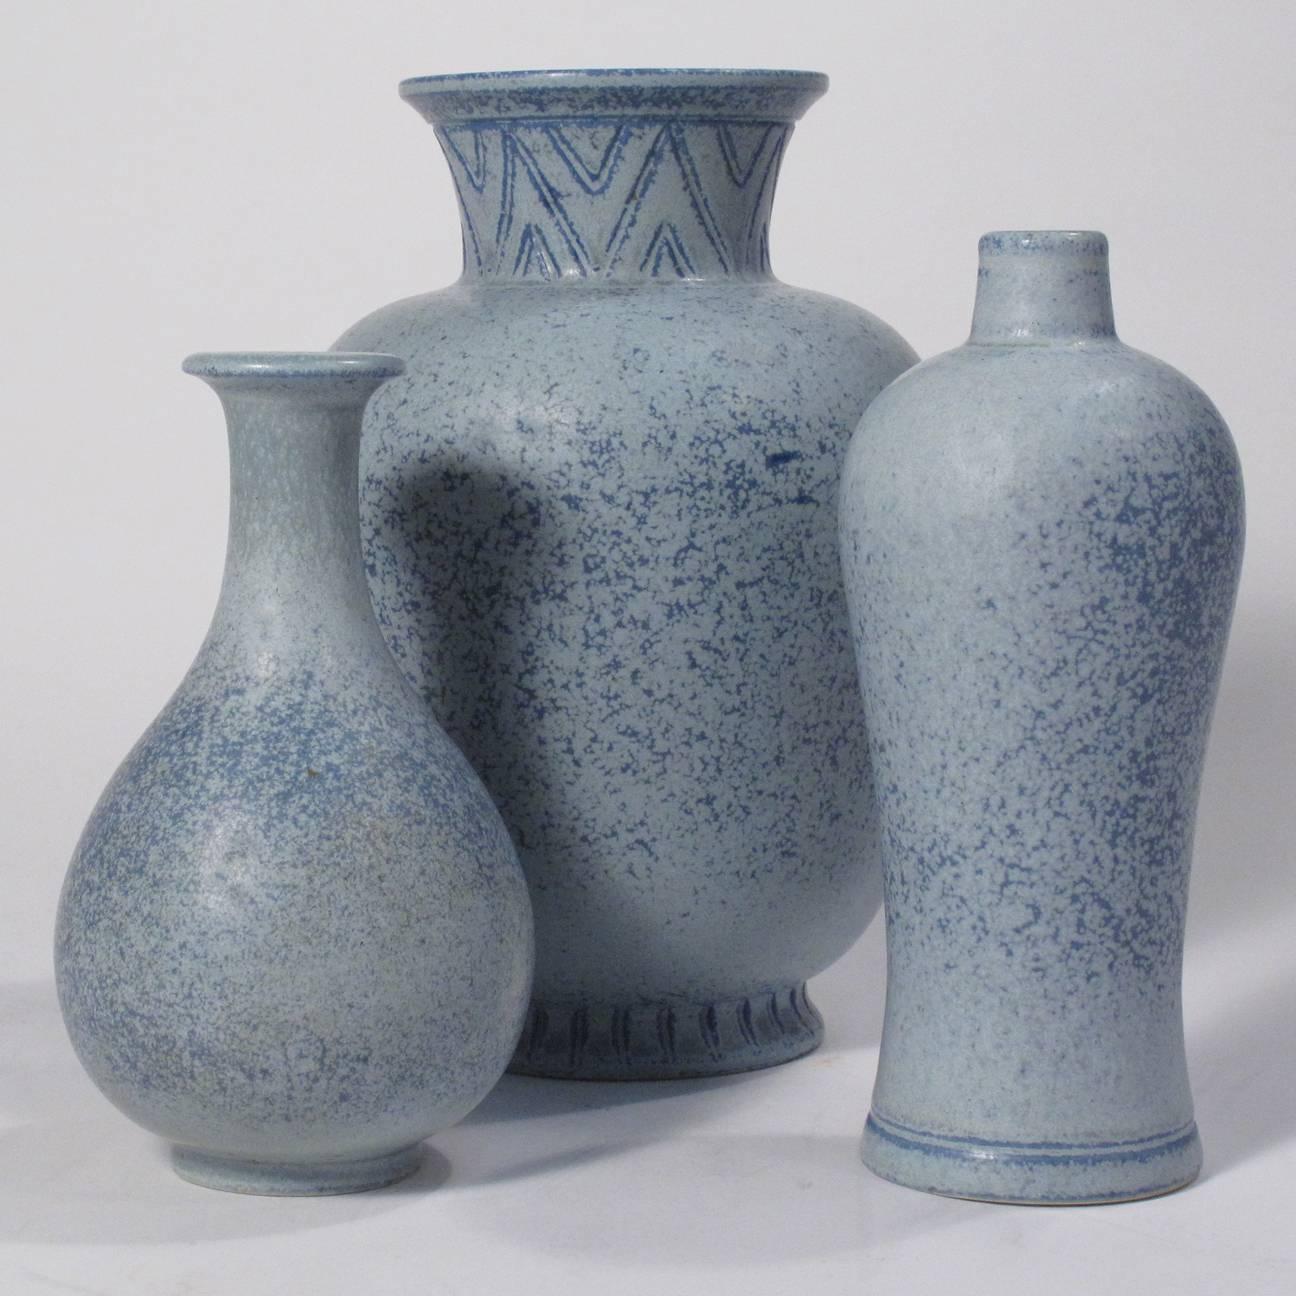 A beautiful grouping of Gunnar Nylund ceramic vases for Rorstrand with a stunning light blue haresfur glaze. Maker’s mark and signature on bottom. Can be purchased individually.

Measures: Left: 3.75" diameter x 5.75" height